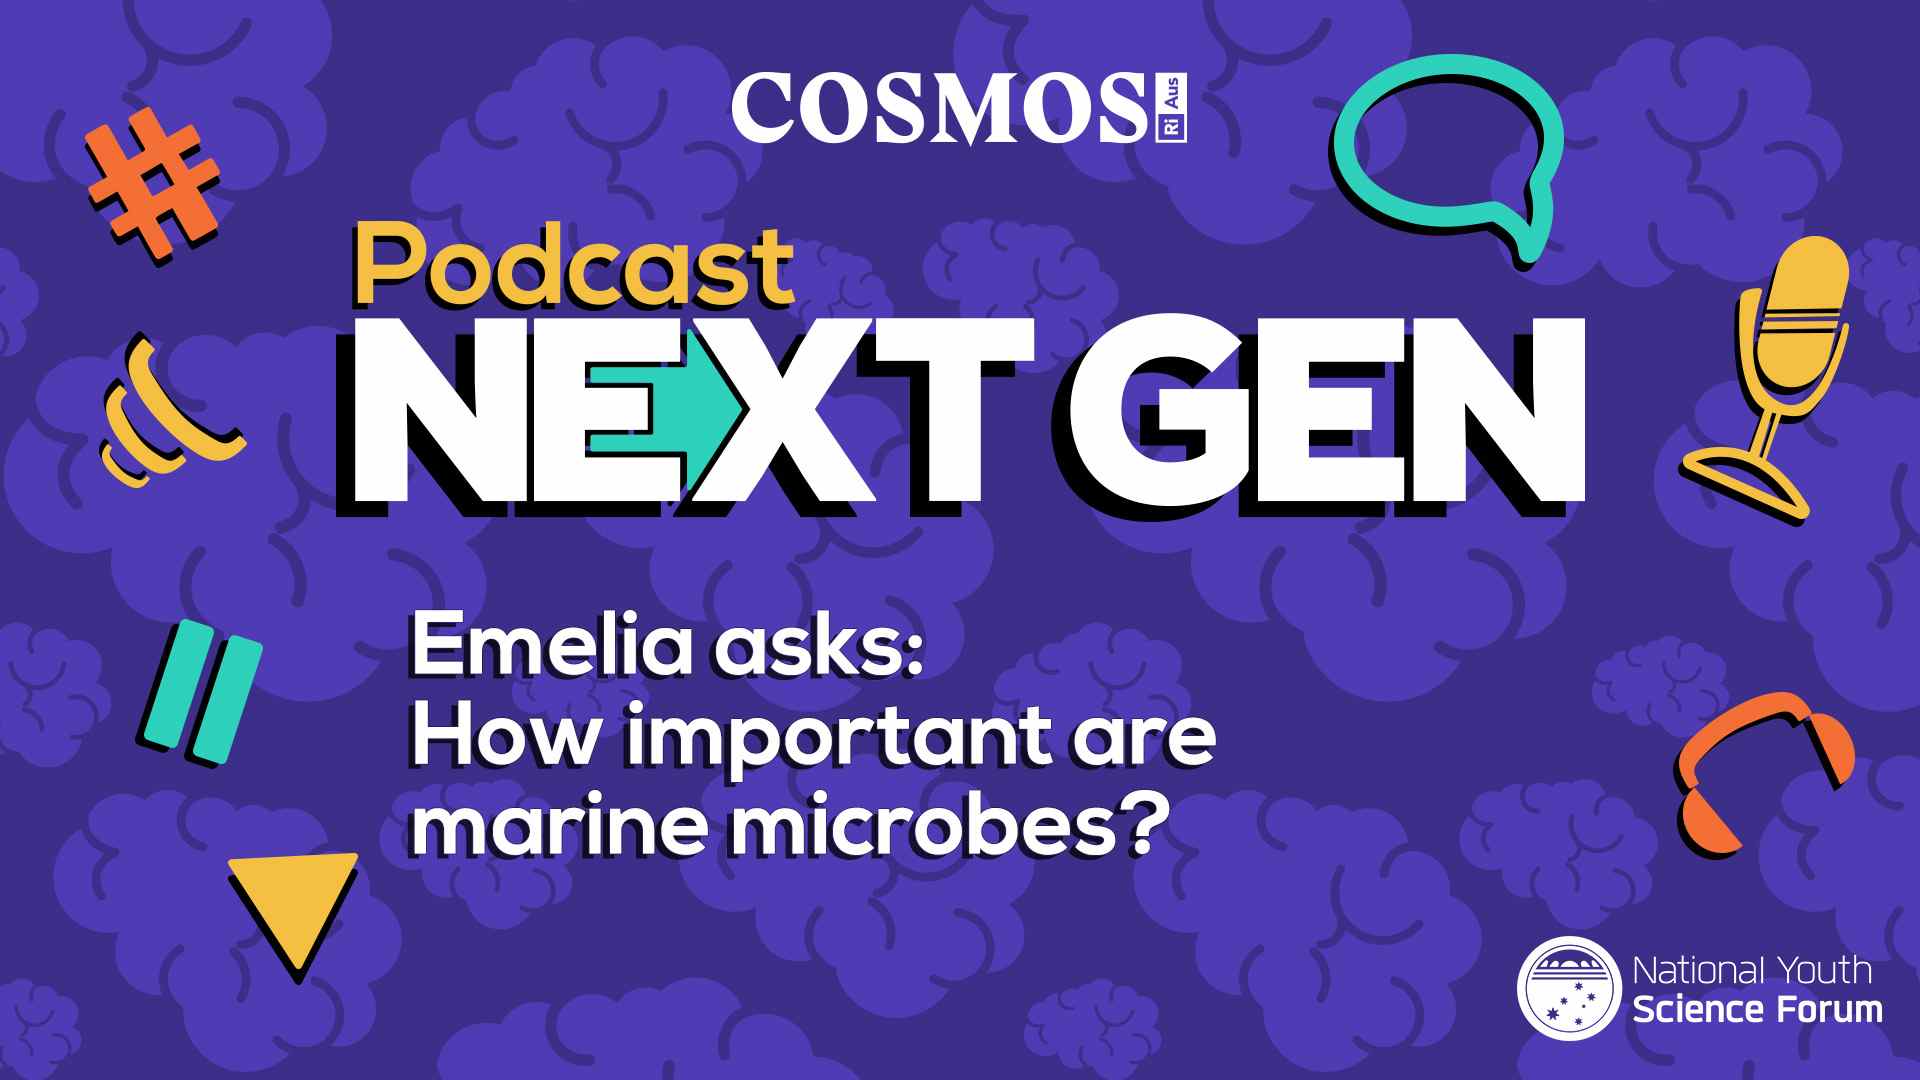 PODCAST NEXT GEN: How important are marine microbes?